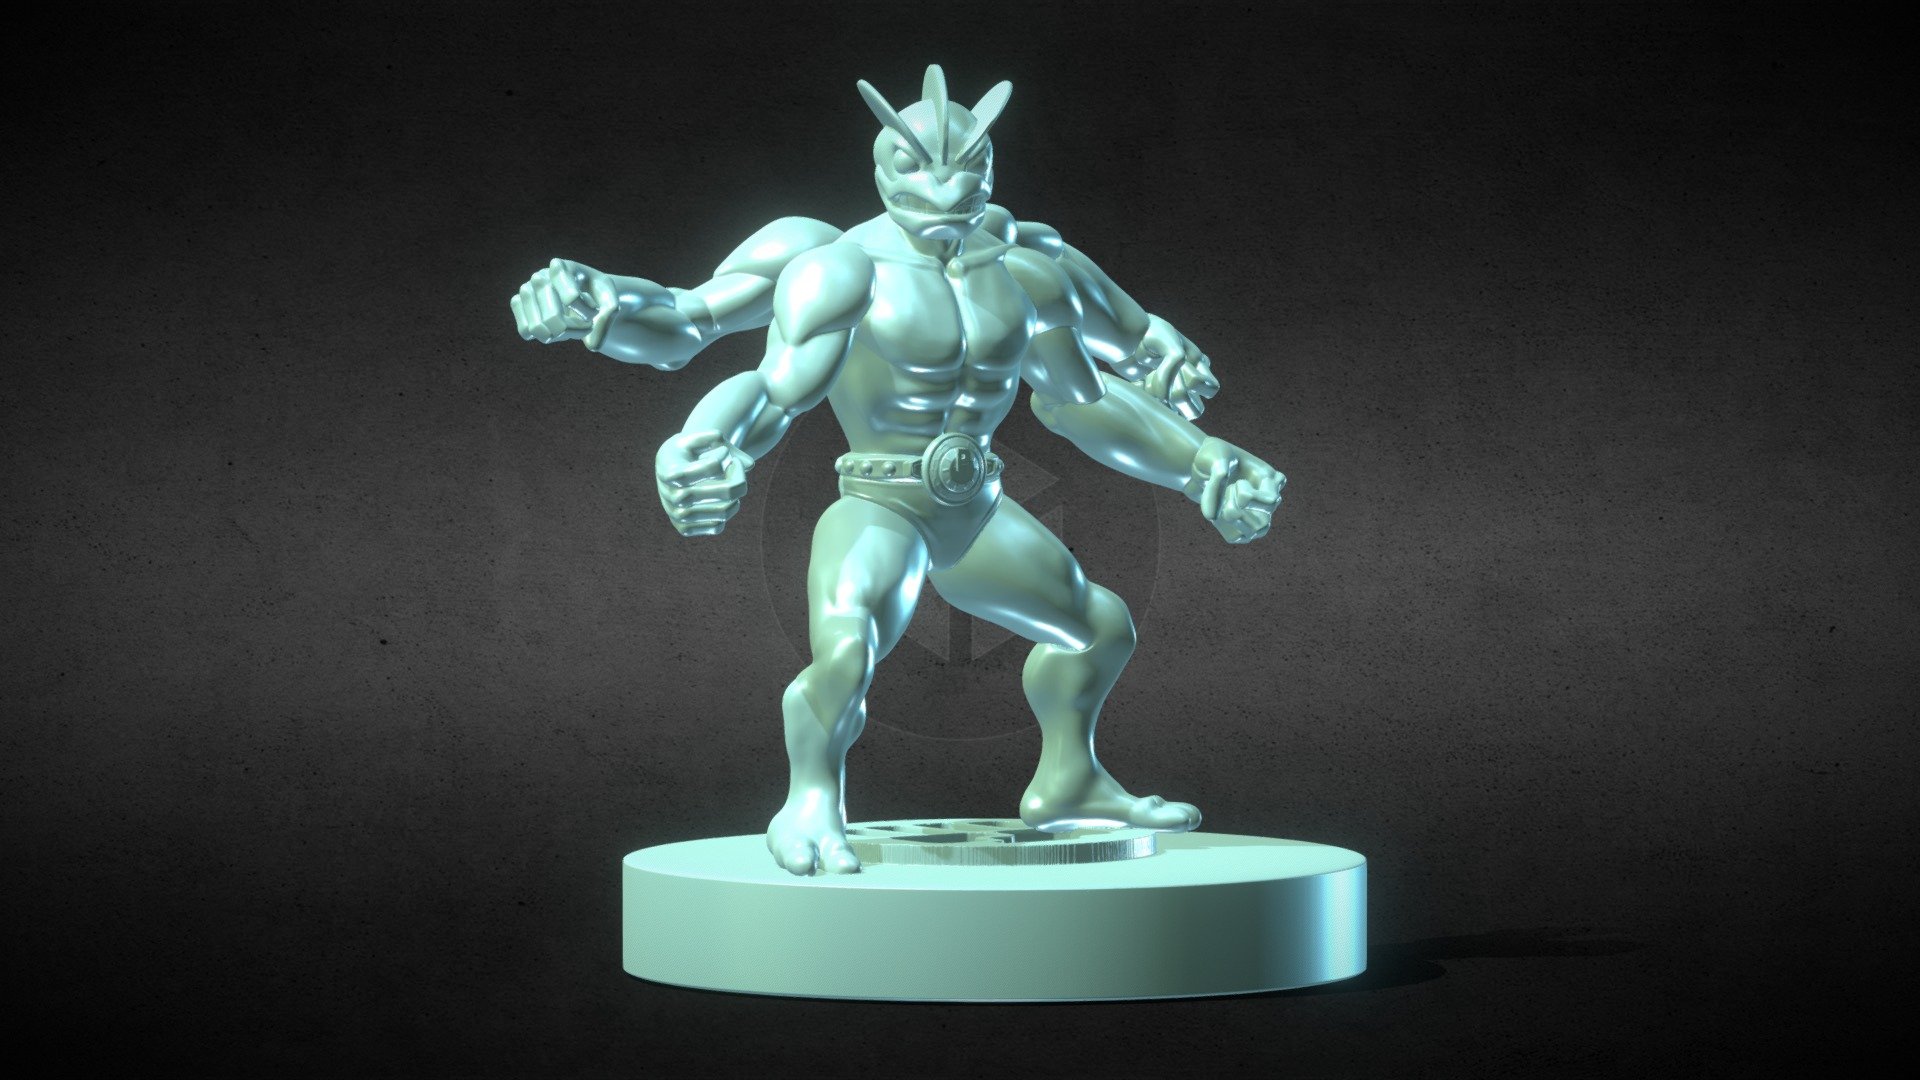 A Machamp Figurine based in the Pokemon of first-generation made in Zbrush for Sculptober 2020 ready for 3D Print I included the OBJ, STL, and ZBrush Tool also, I included a ZBrush Tool Machoke A Pose and Machamp Figurine T Pose I added if you want to finish those sculpts and pose it whether you want If you need 3D Game Assets or STL files I can do commission works 3d model